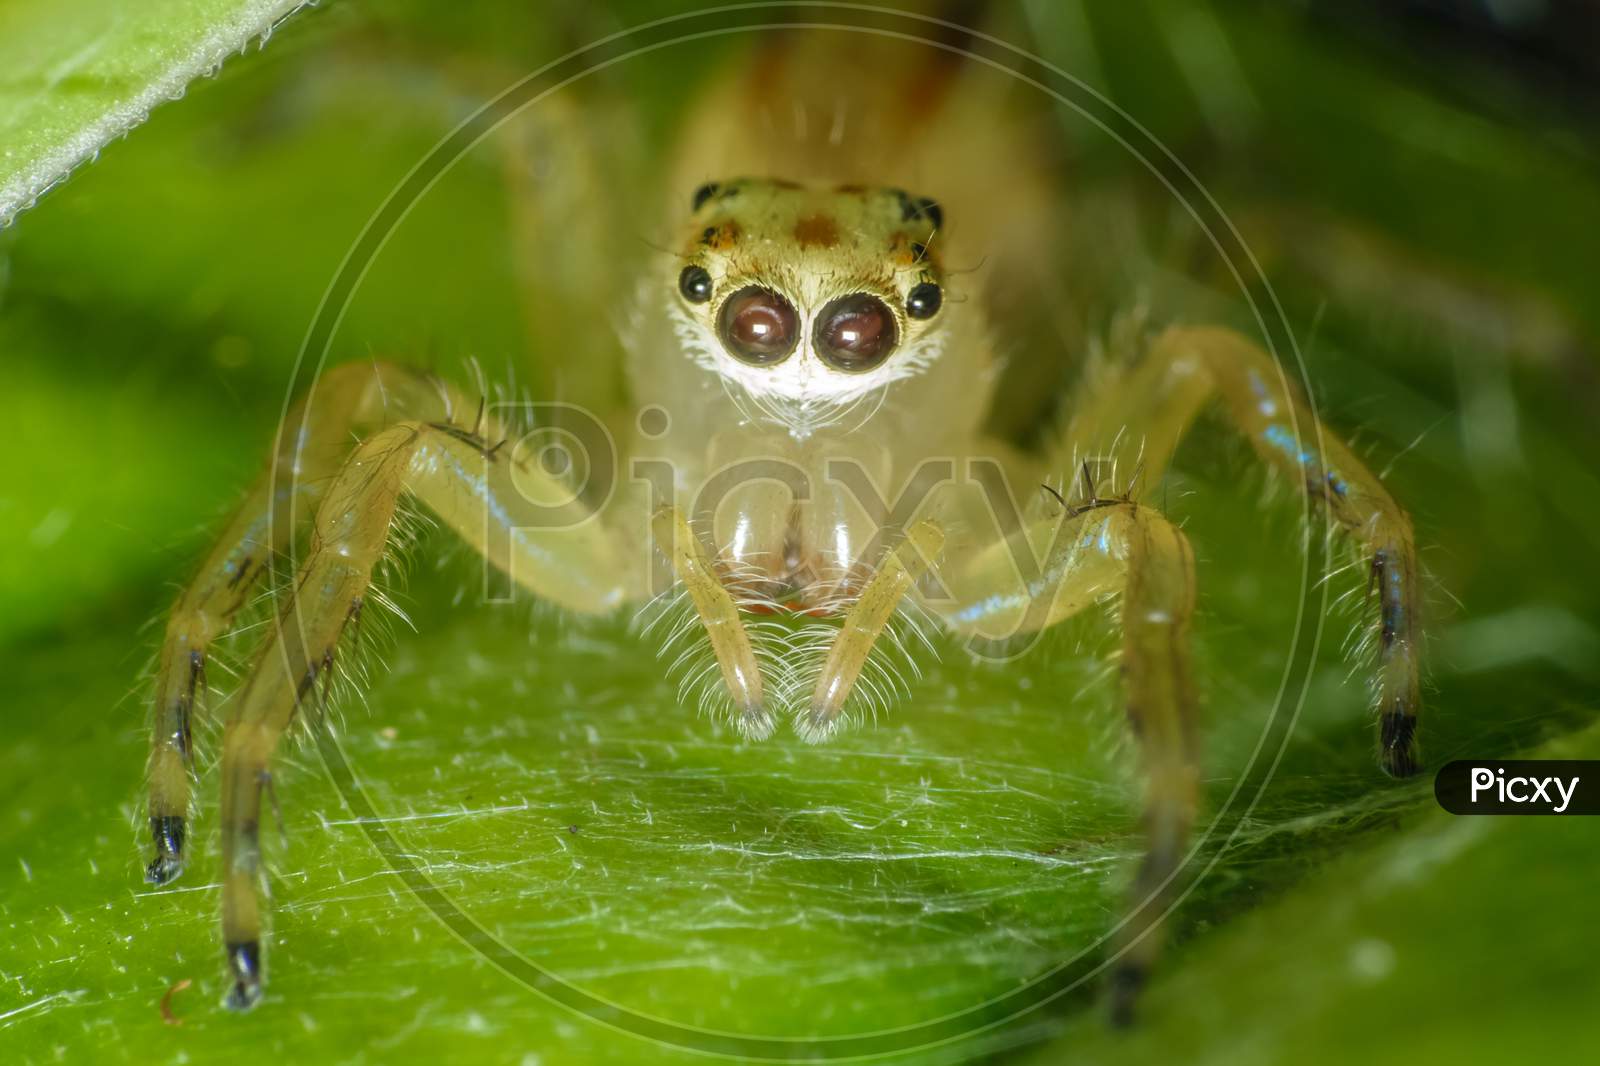 Ultra Macro Shot Of A Yellow Jumping Spider With Webs In The Background